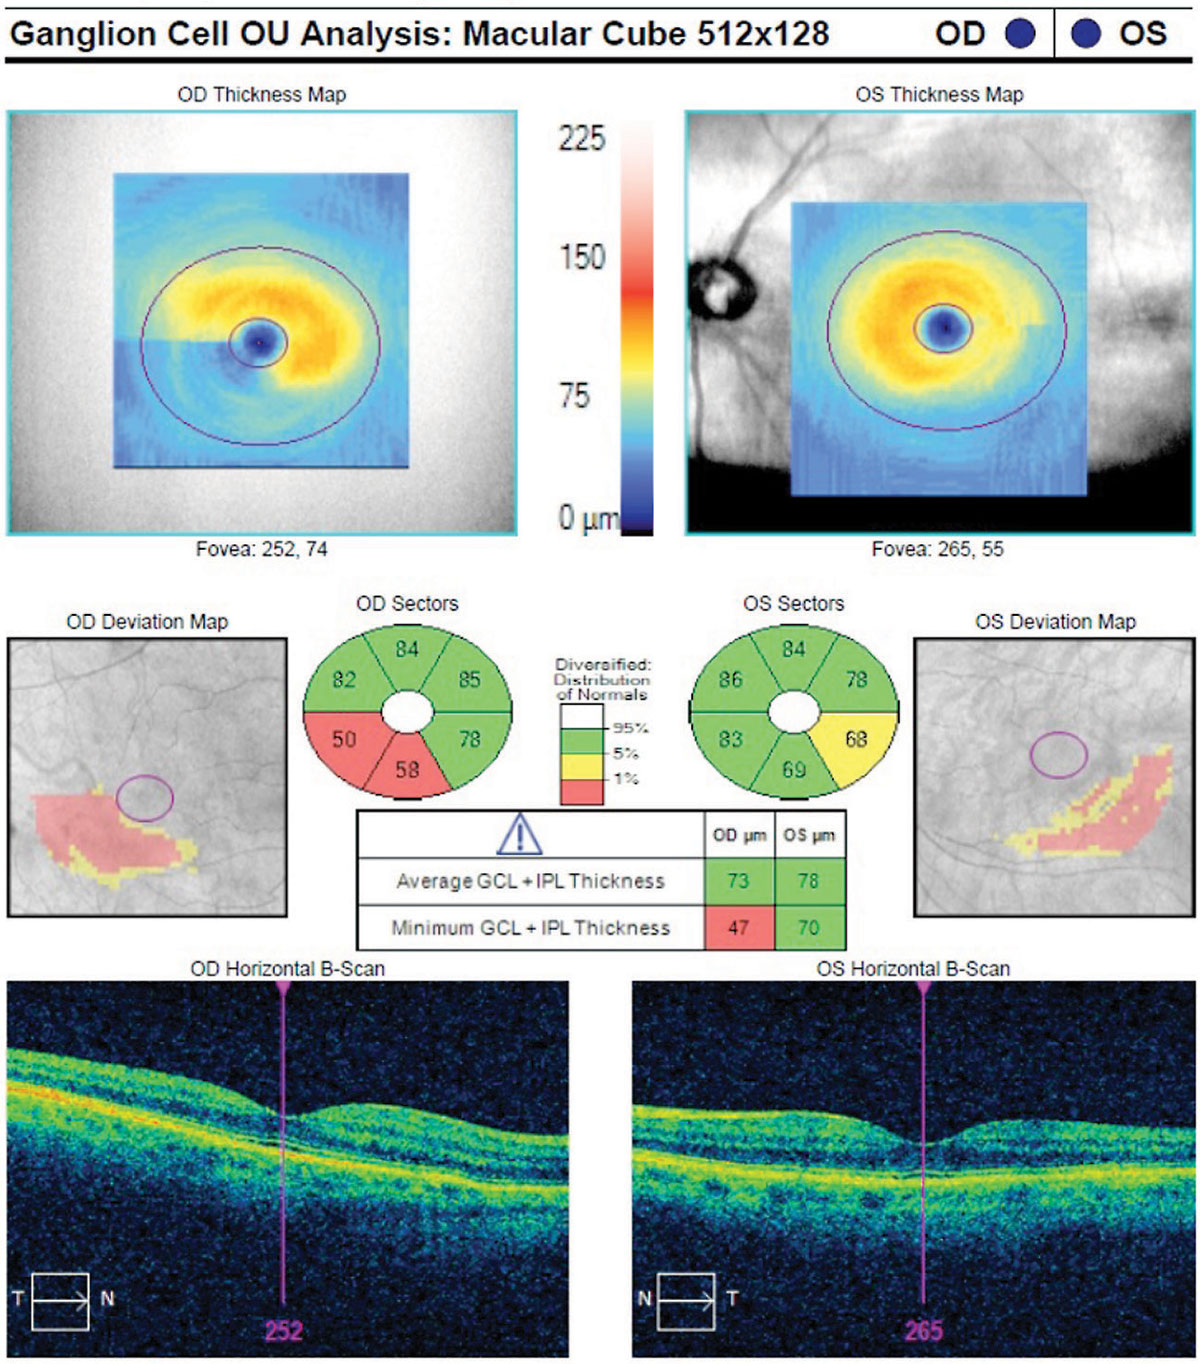 GCIPL thinning shown on macular OCT was found in this study to correlate with increased disease risk in glaucoma suspects.